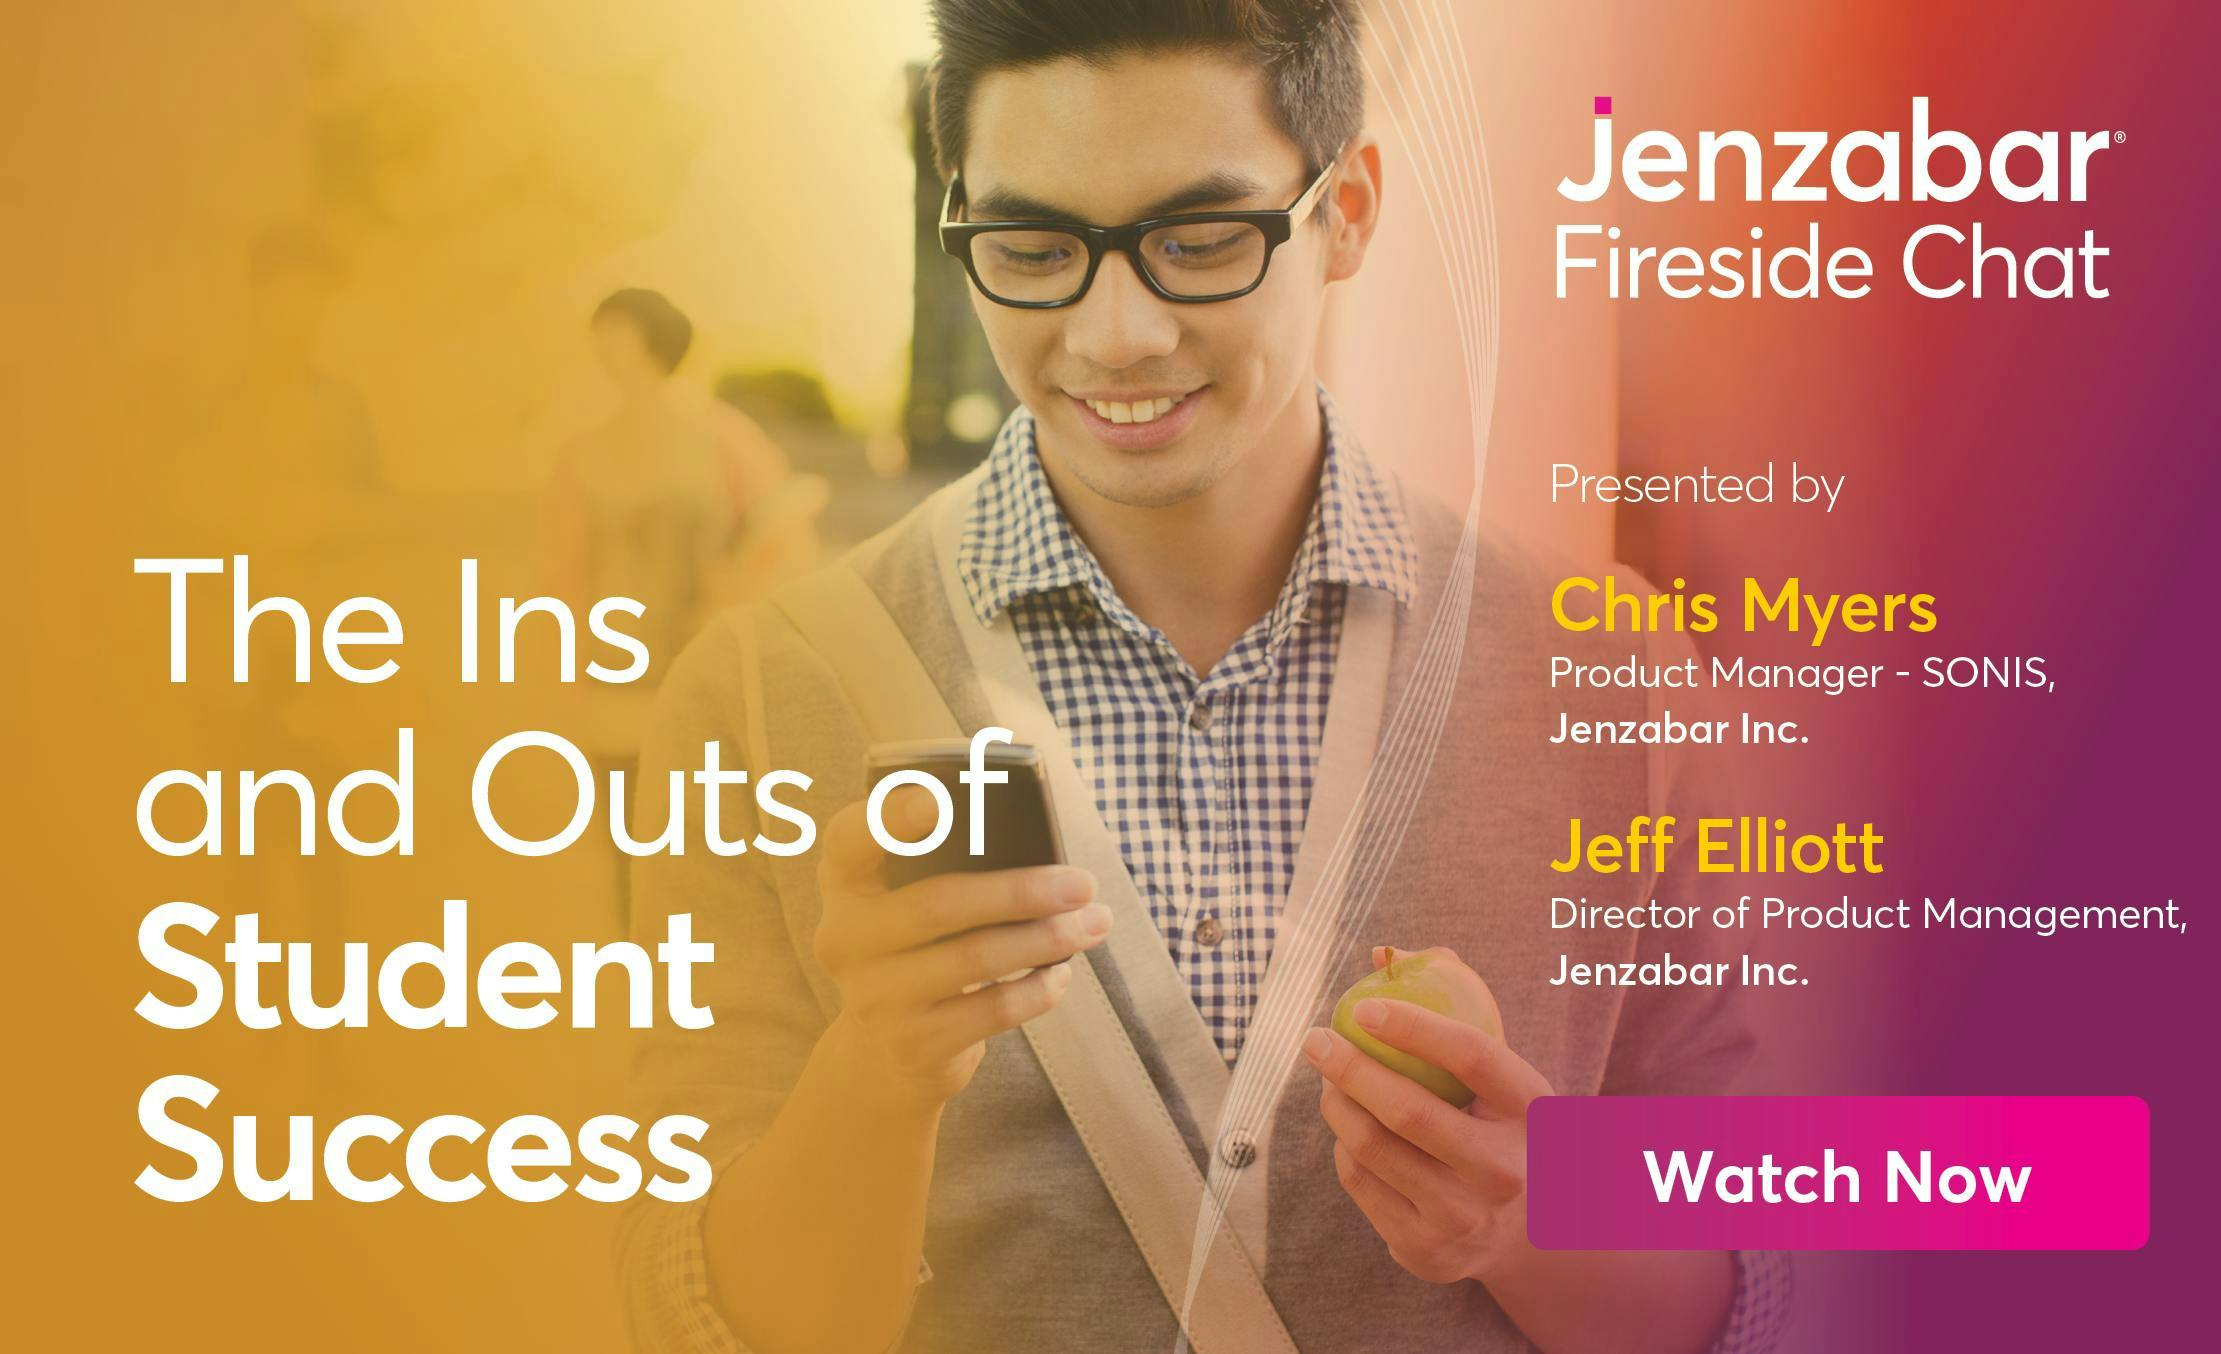 Jenzabar Fireside Chat: The Ins and Outs of Student Success